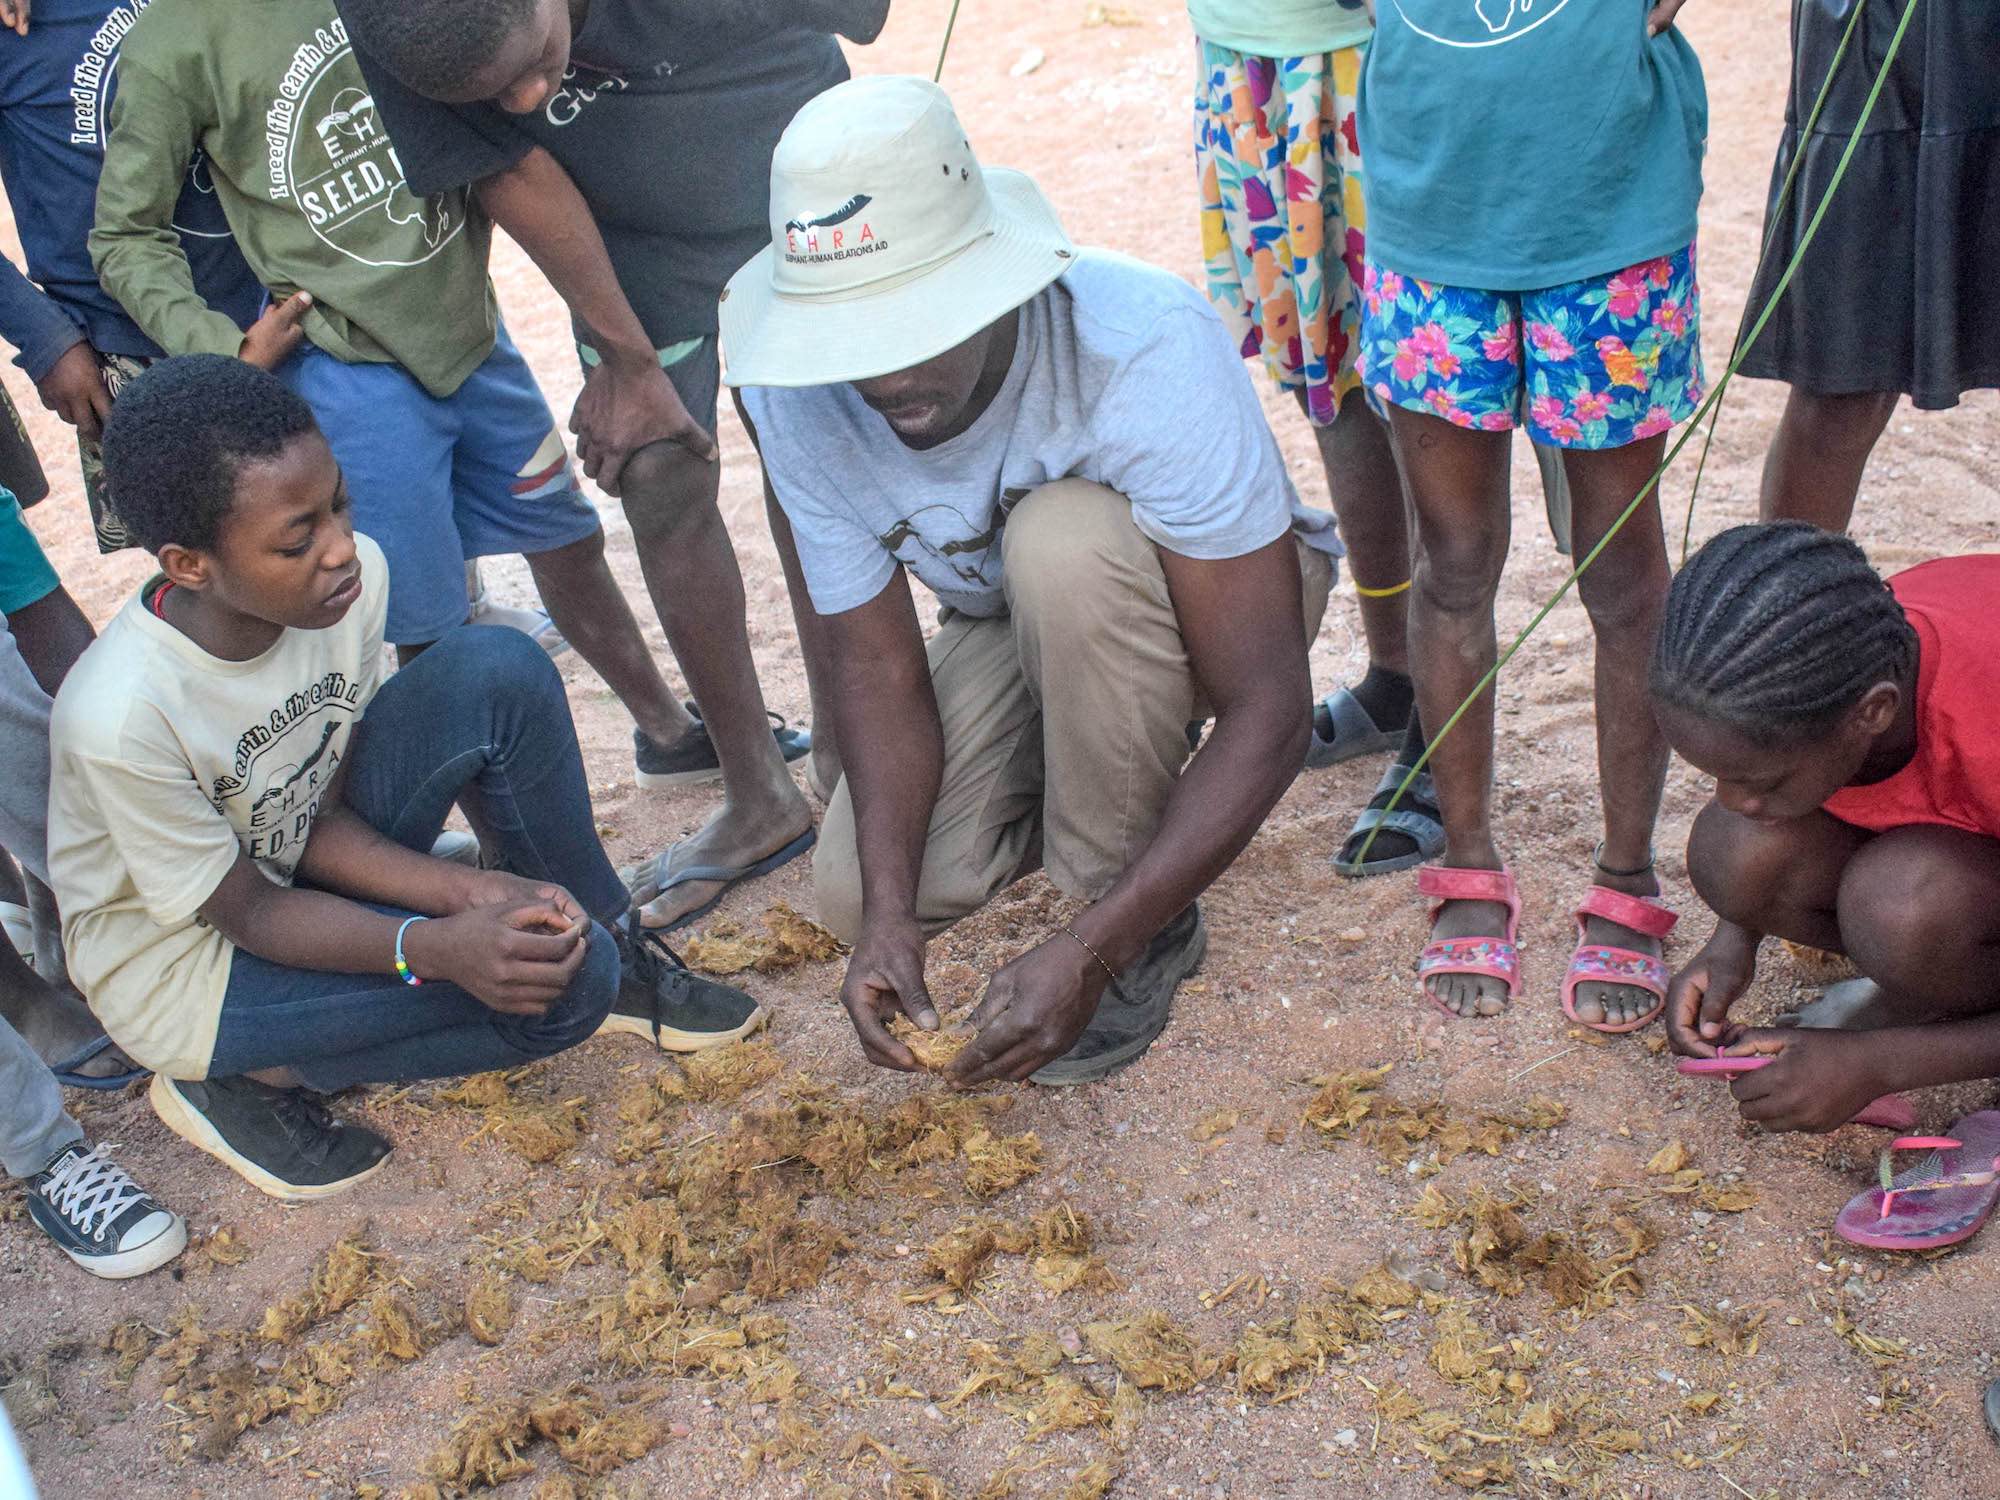 An instructor showing a group of children the makeup of animal dung.